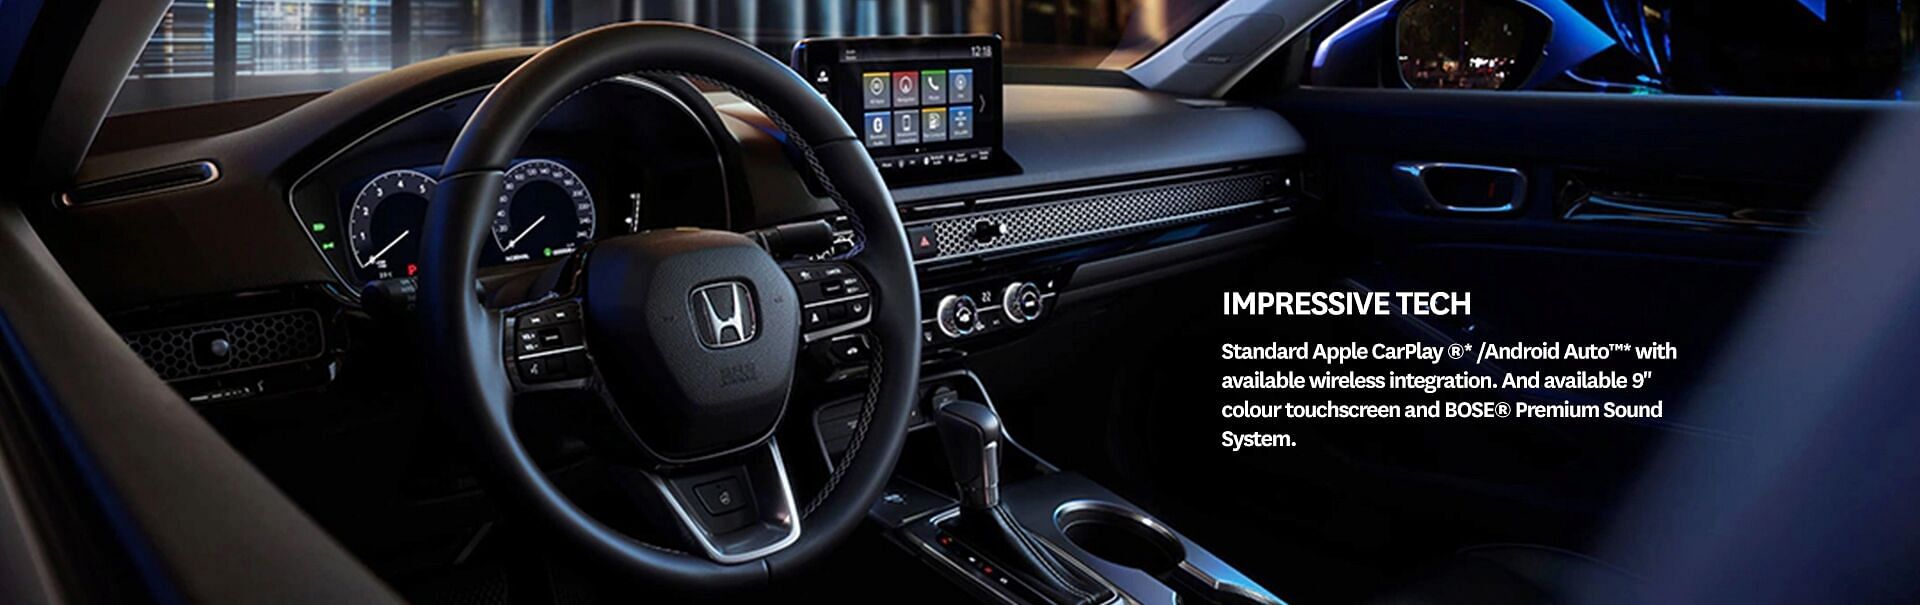 Impressive tech. Standard Apple CarPlay ®* /Android Auto™* with available wireless integration. And available 9″ colour touchscreen and BOSE® Premium Sound System.